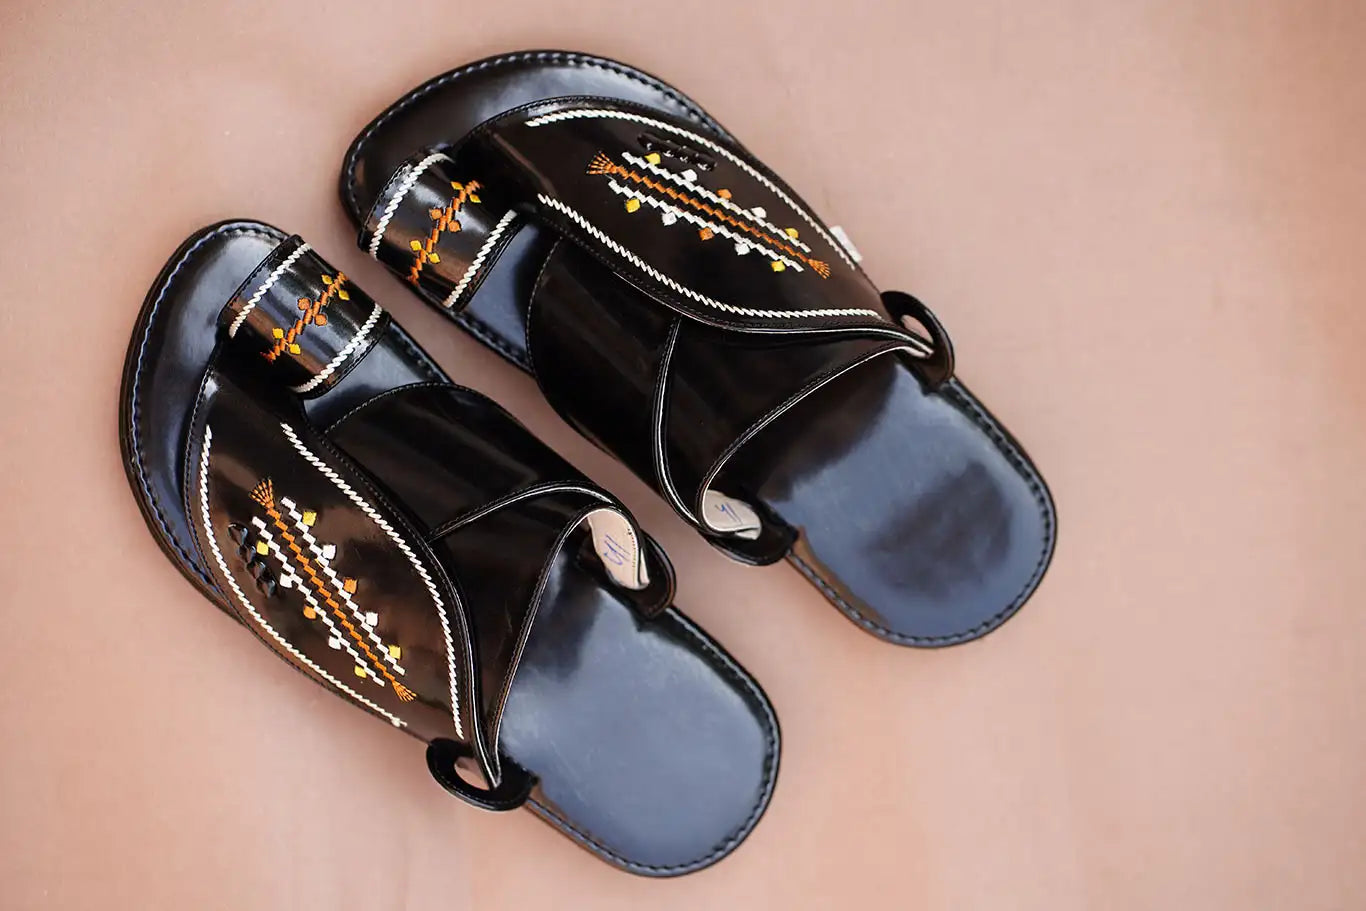 Arabic Khaliji Sandals in Black Colour with iconic Embroidery